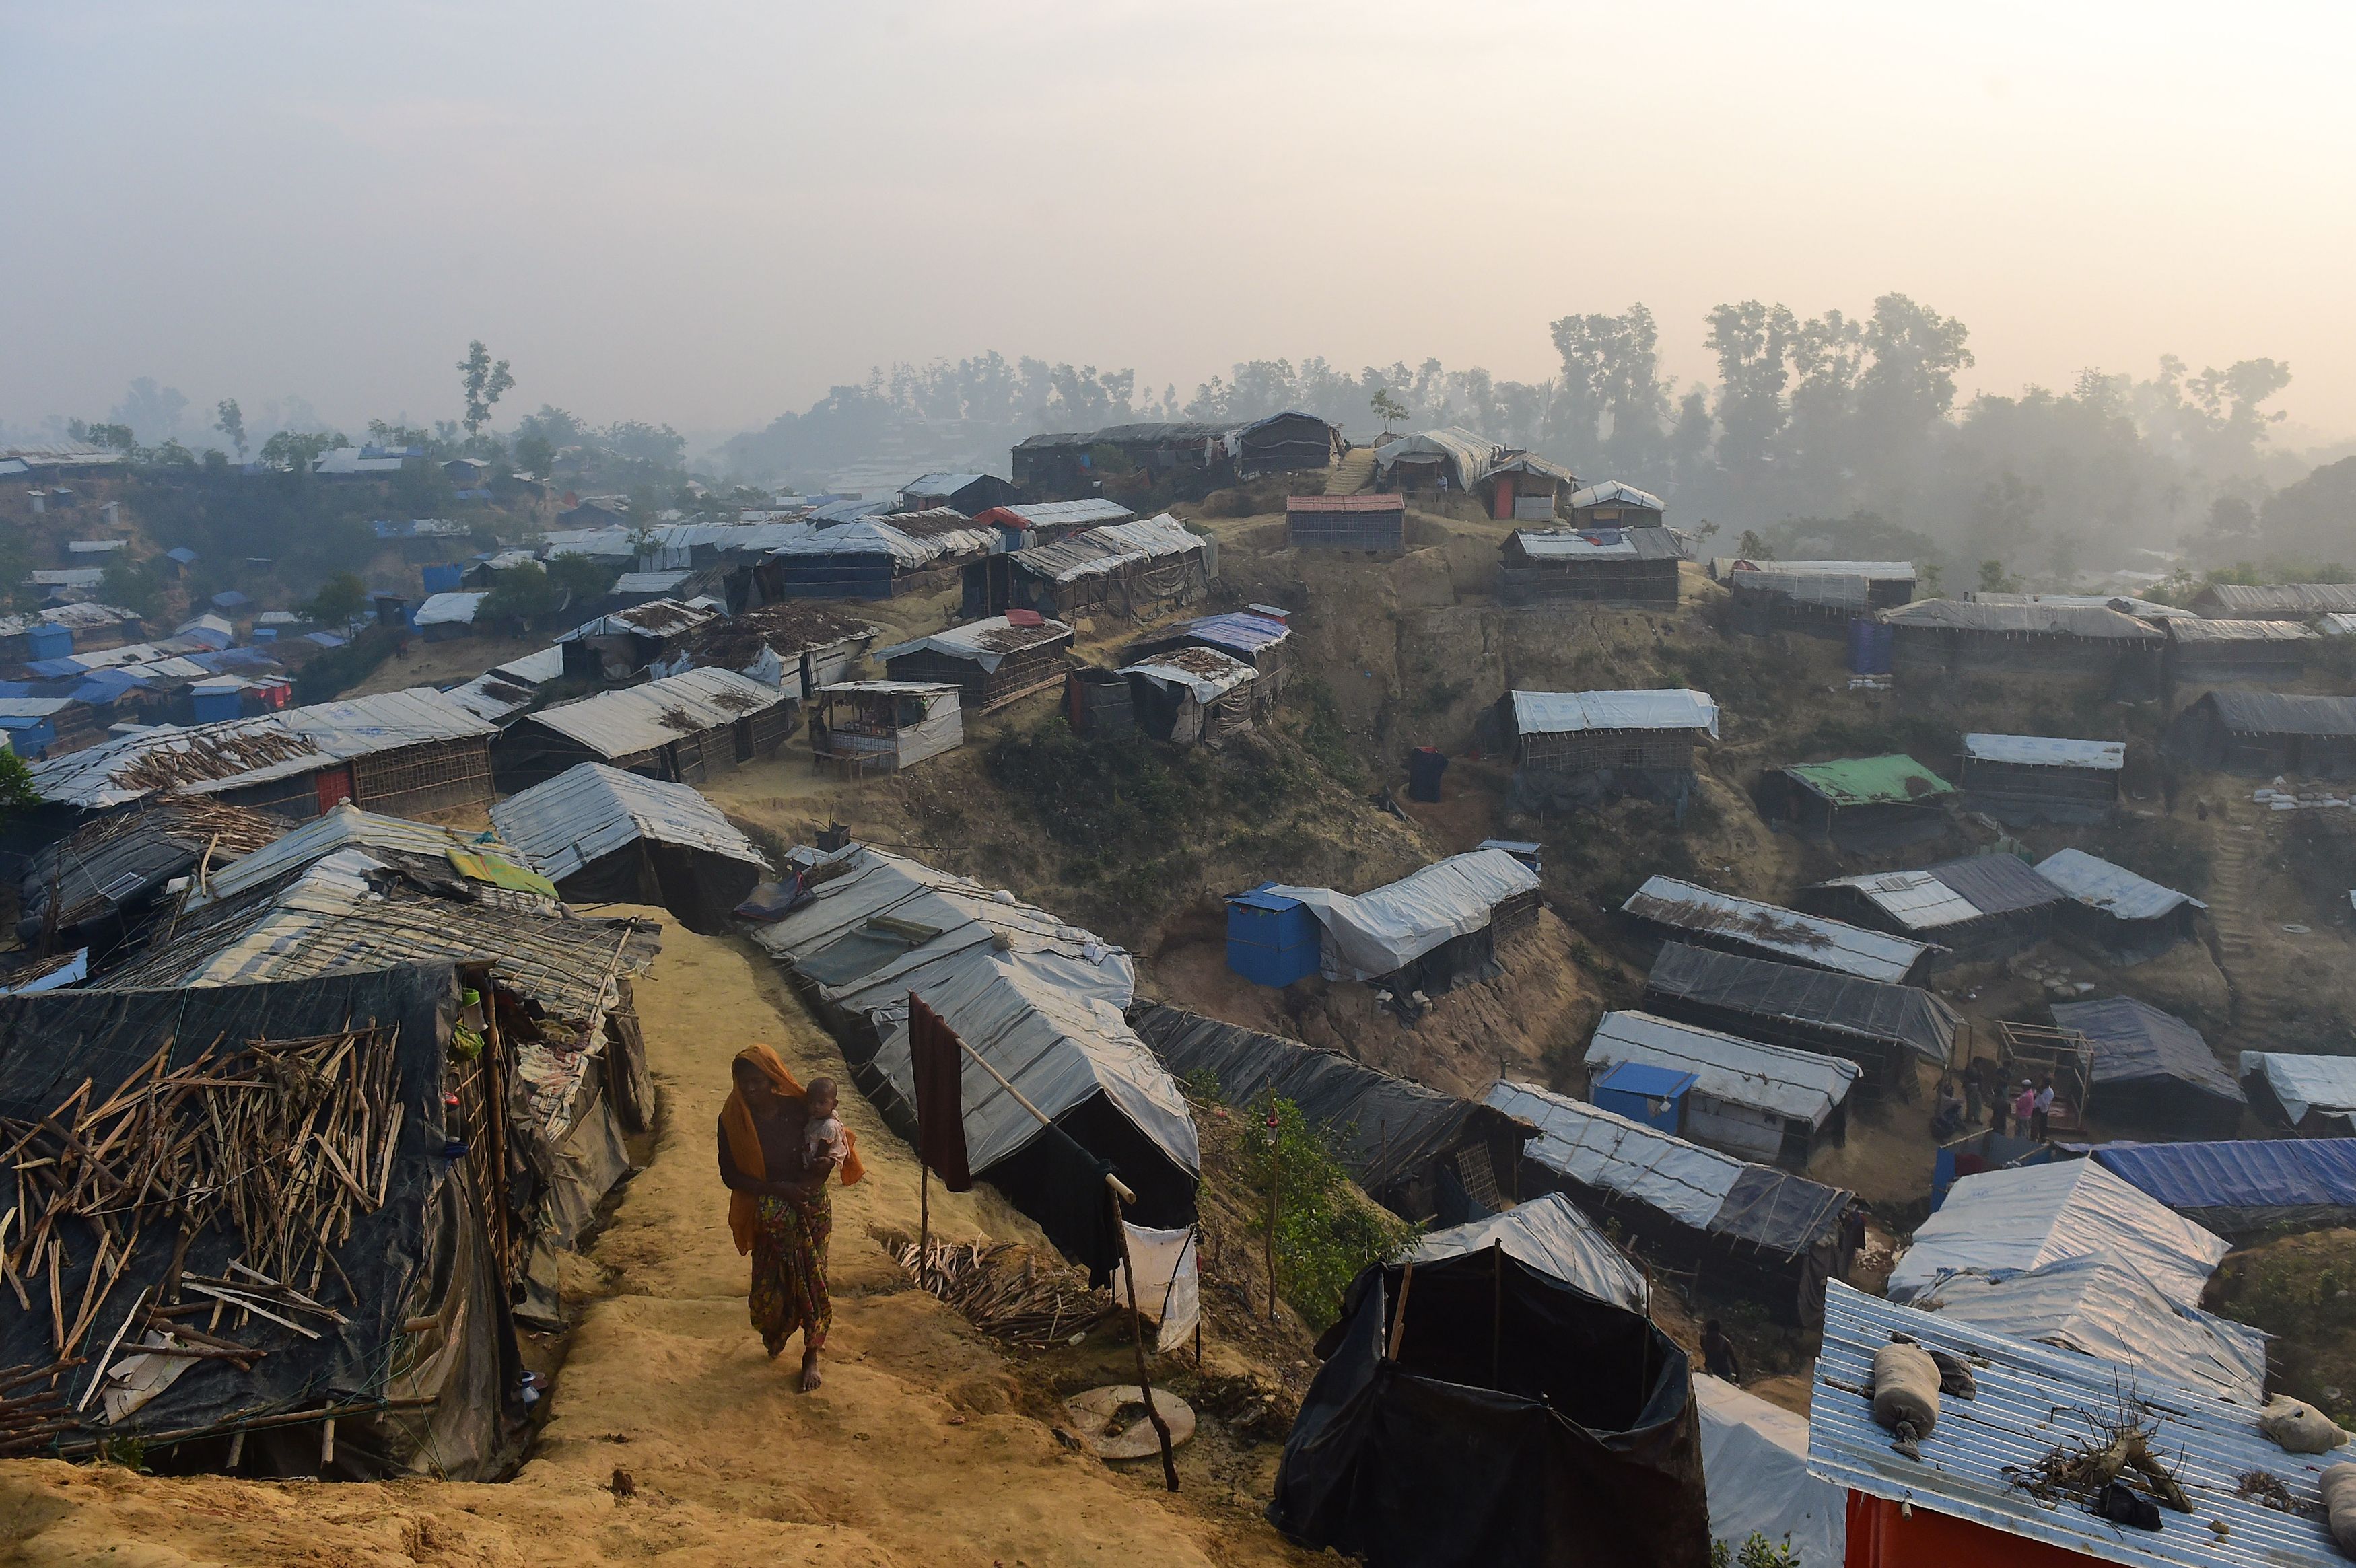 A Rohingya refugee woman walks with a child in her lap in Balukhali refugee camp in the Bangladeshi district of Ukhia on Nov. 23, 2017. (MUNIR UZ ZAMAN—AFP/Getty Images)